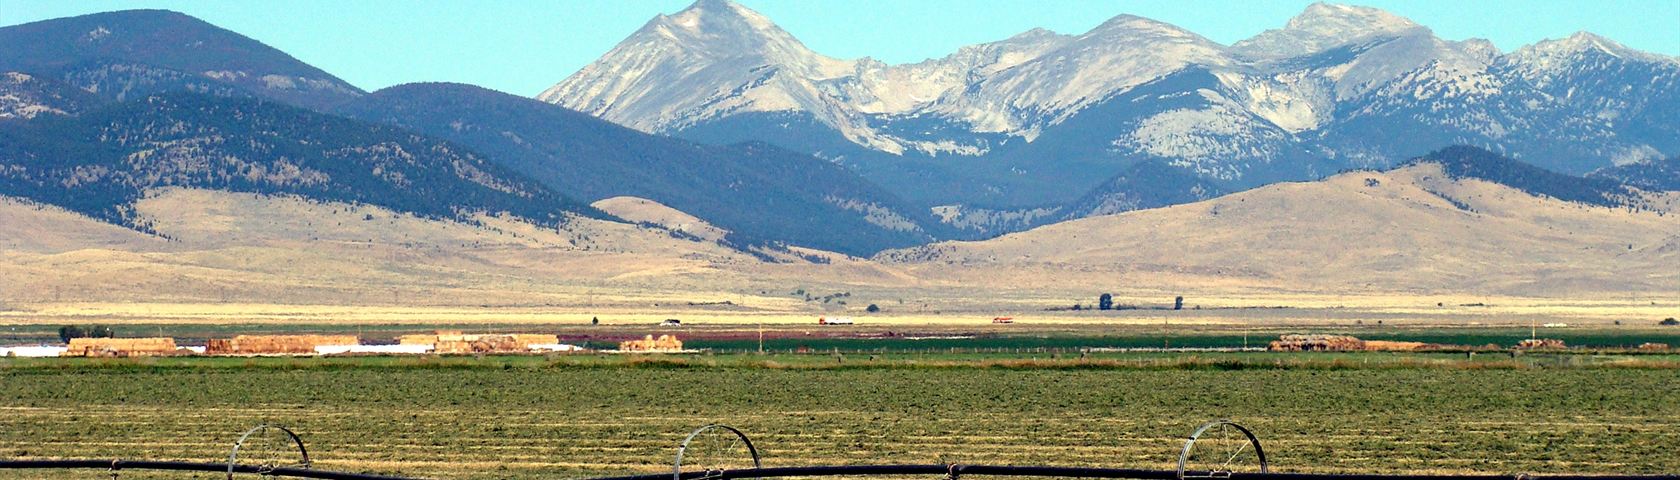 Mountain View Across Irrigated Field